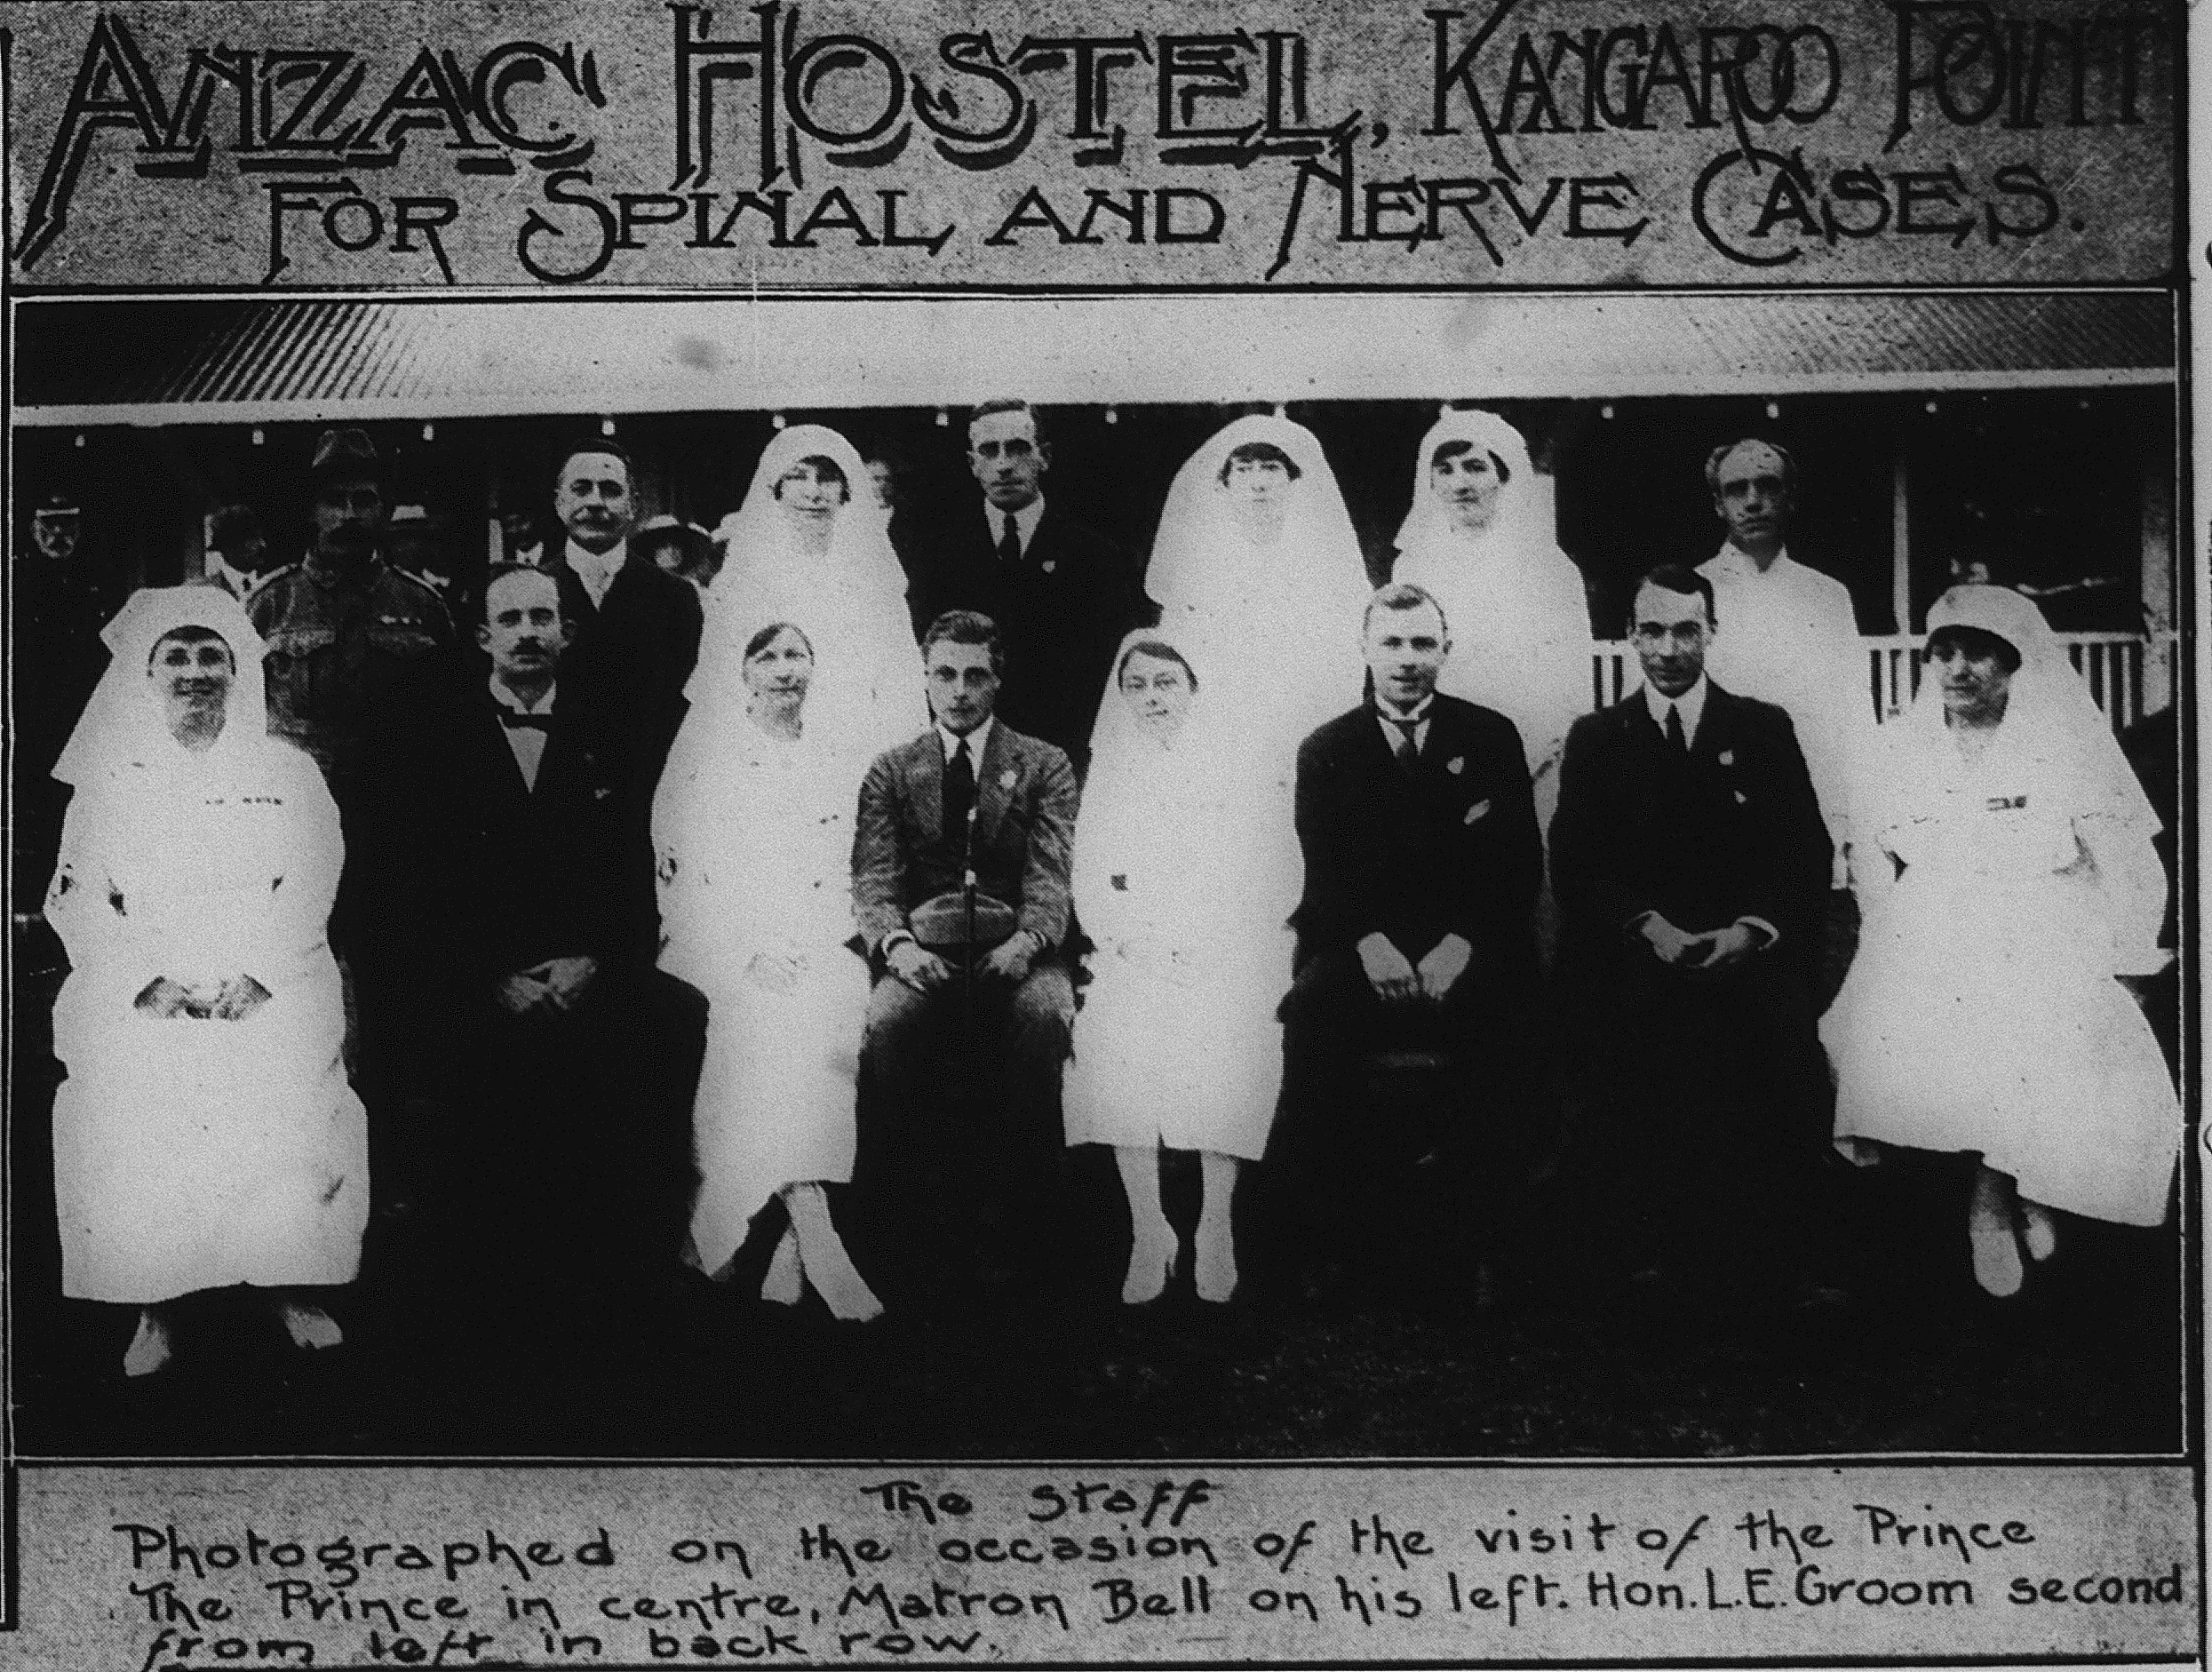 Anzac Hostel Kangaroo Point: For Spinal and Nerve Cases, The Queenslander, Sat 18 September 1920, pg. 19, National Library of Queensland. 